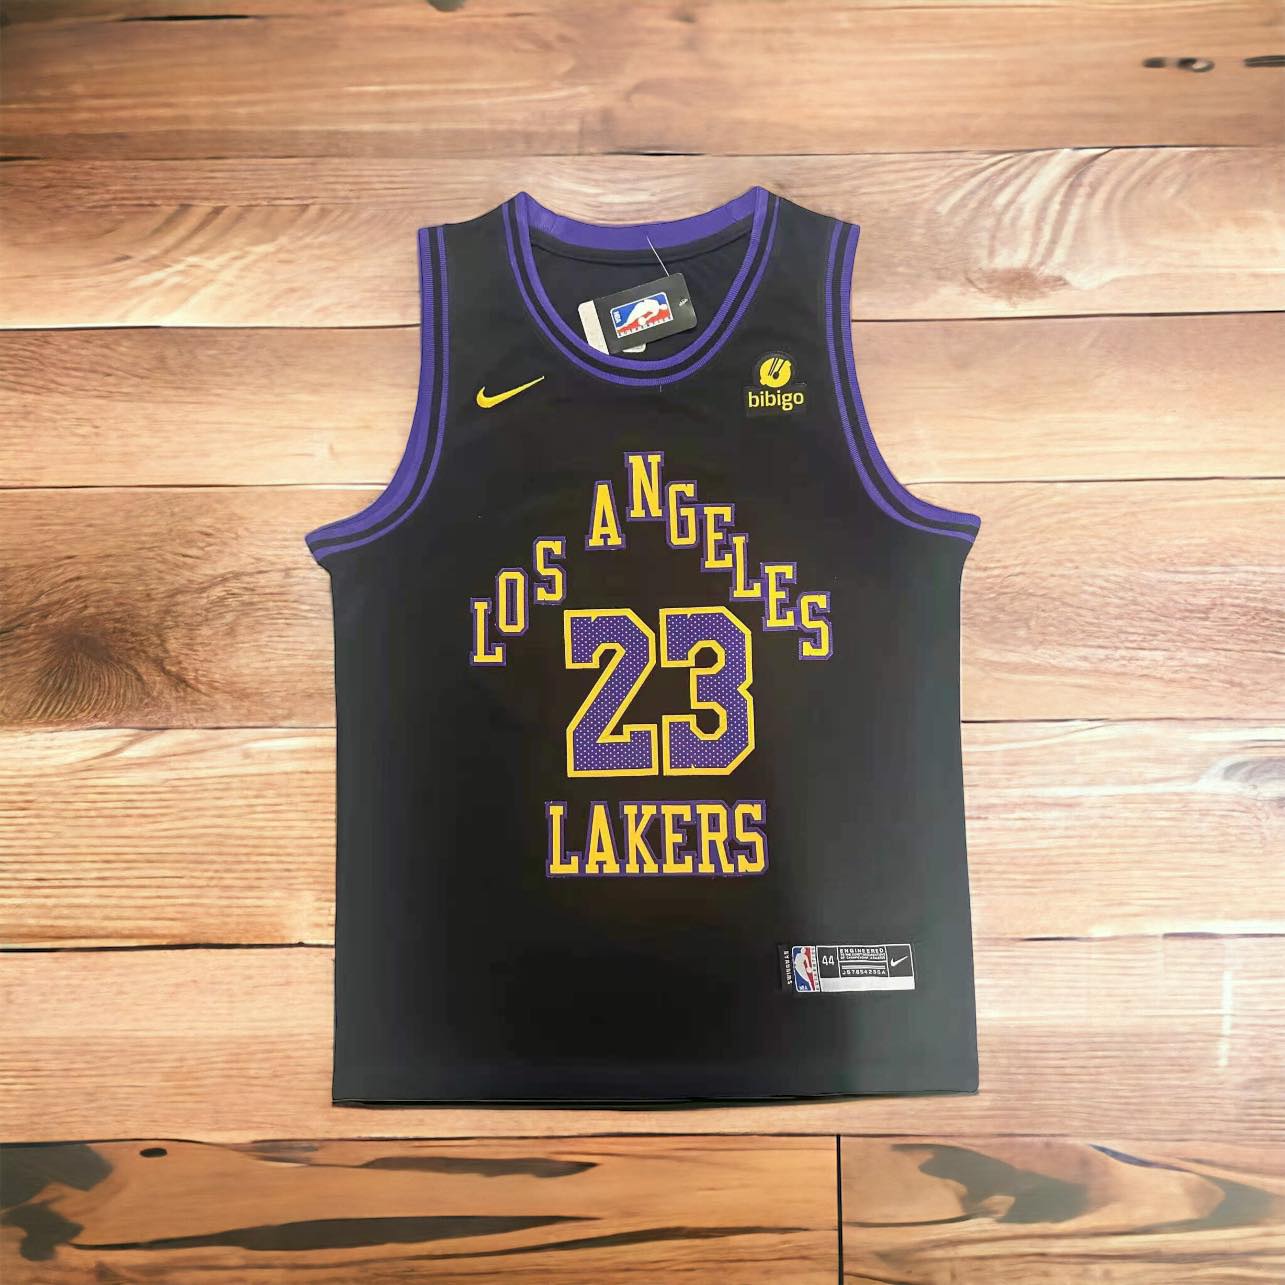 Jersey for kids Lakers 23 James sando shorts set 3-17yrs old